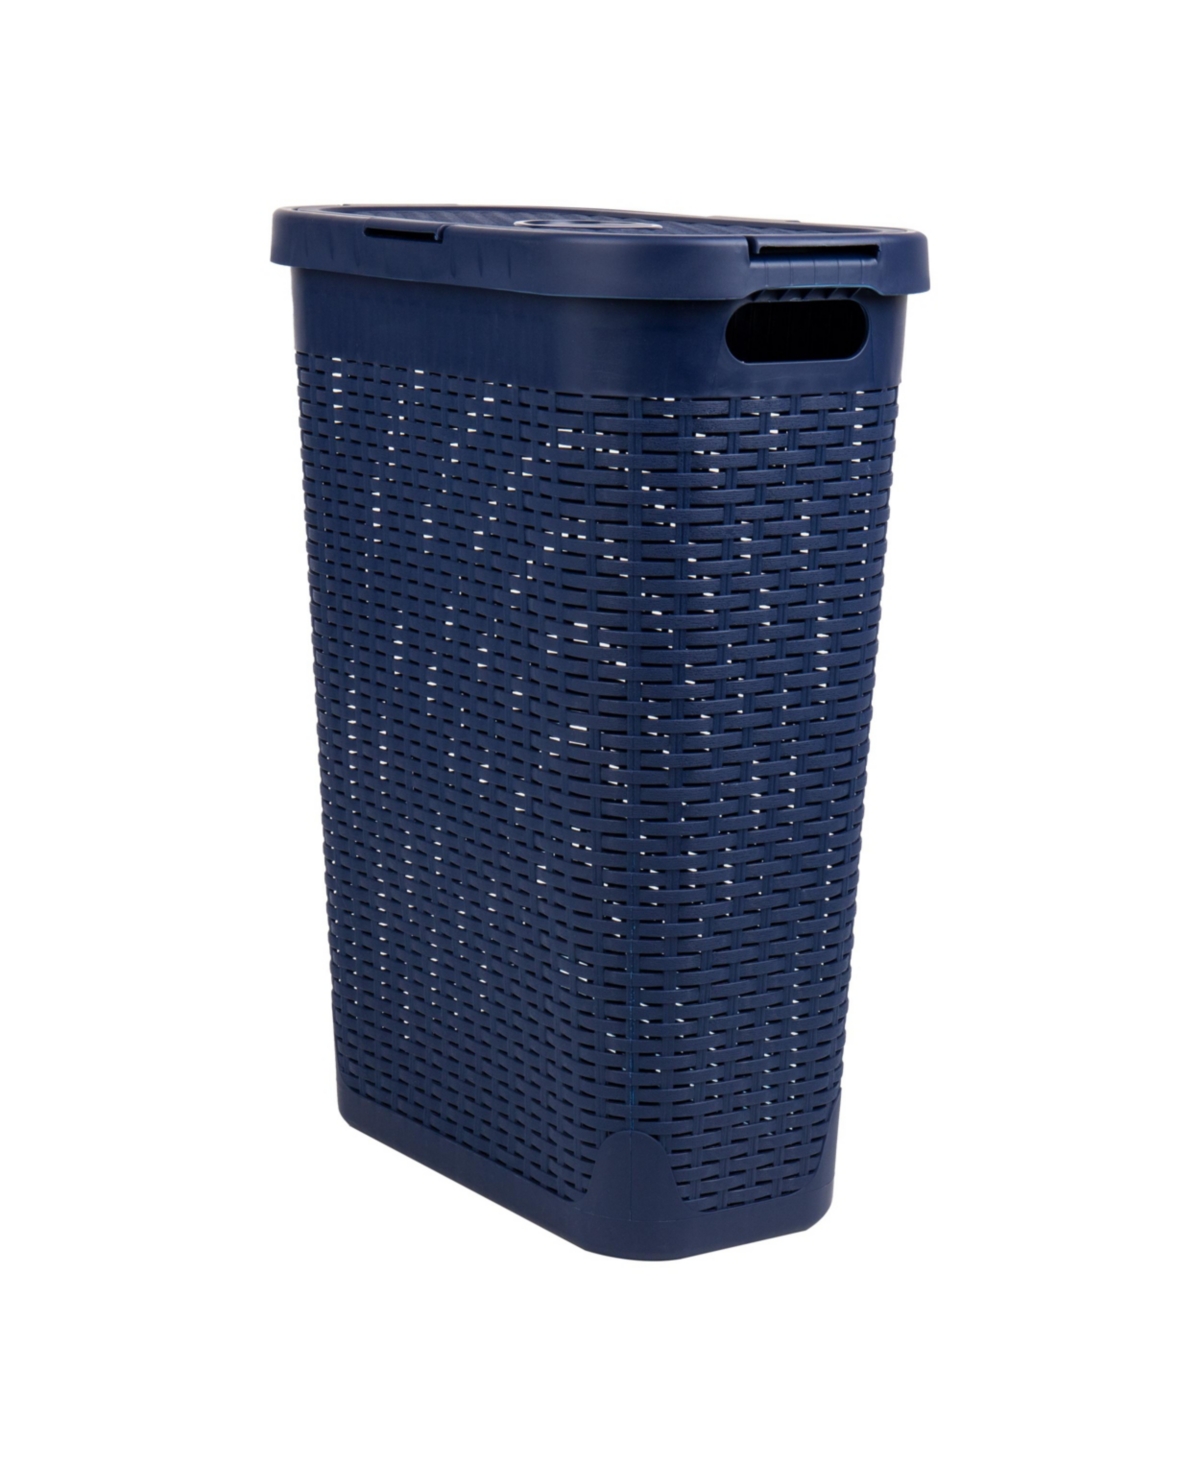 Mind Reader Basket Collection, Slim Laundry Hamper, 40 Liter 15kg/33lbs Capacity, Attached Hinged Lid In Navy